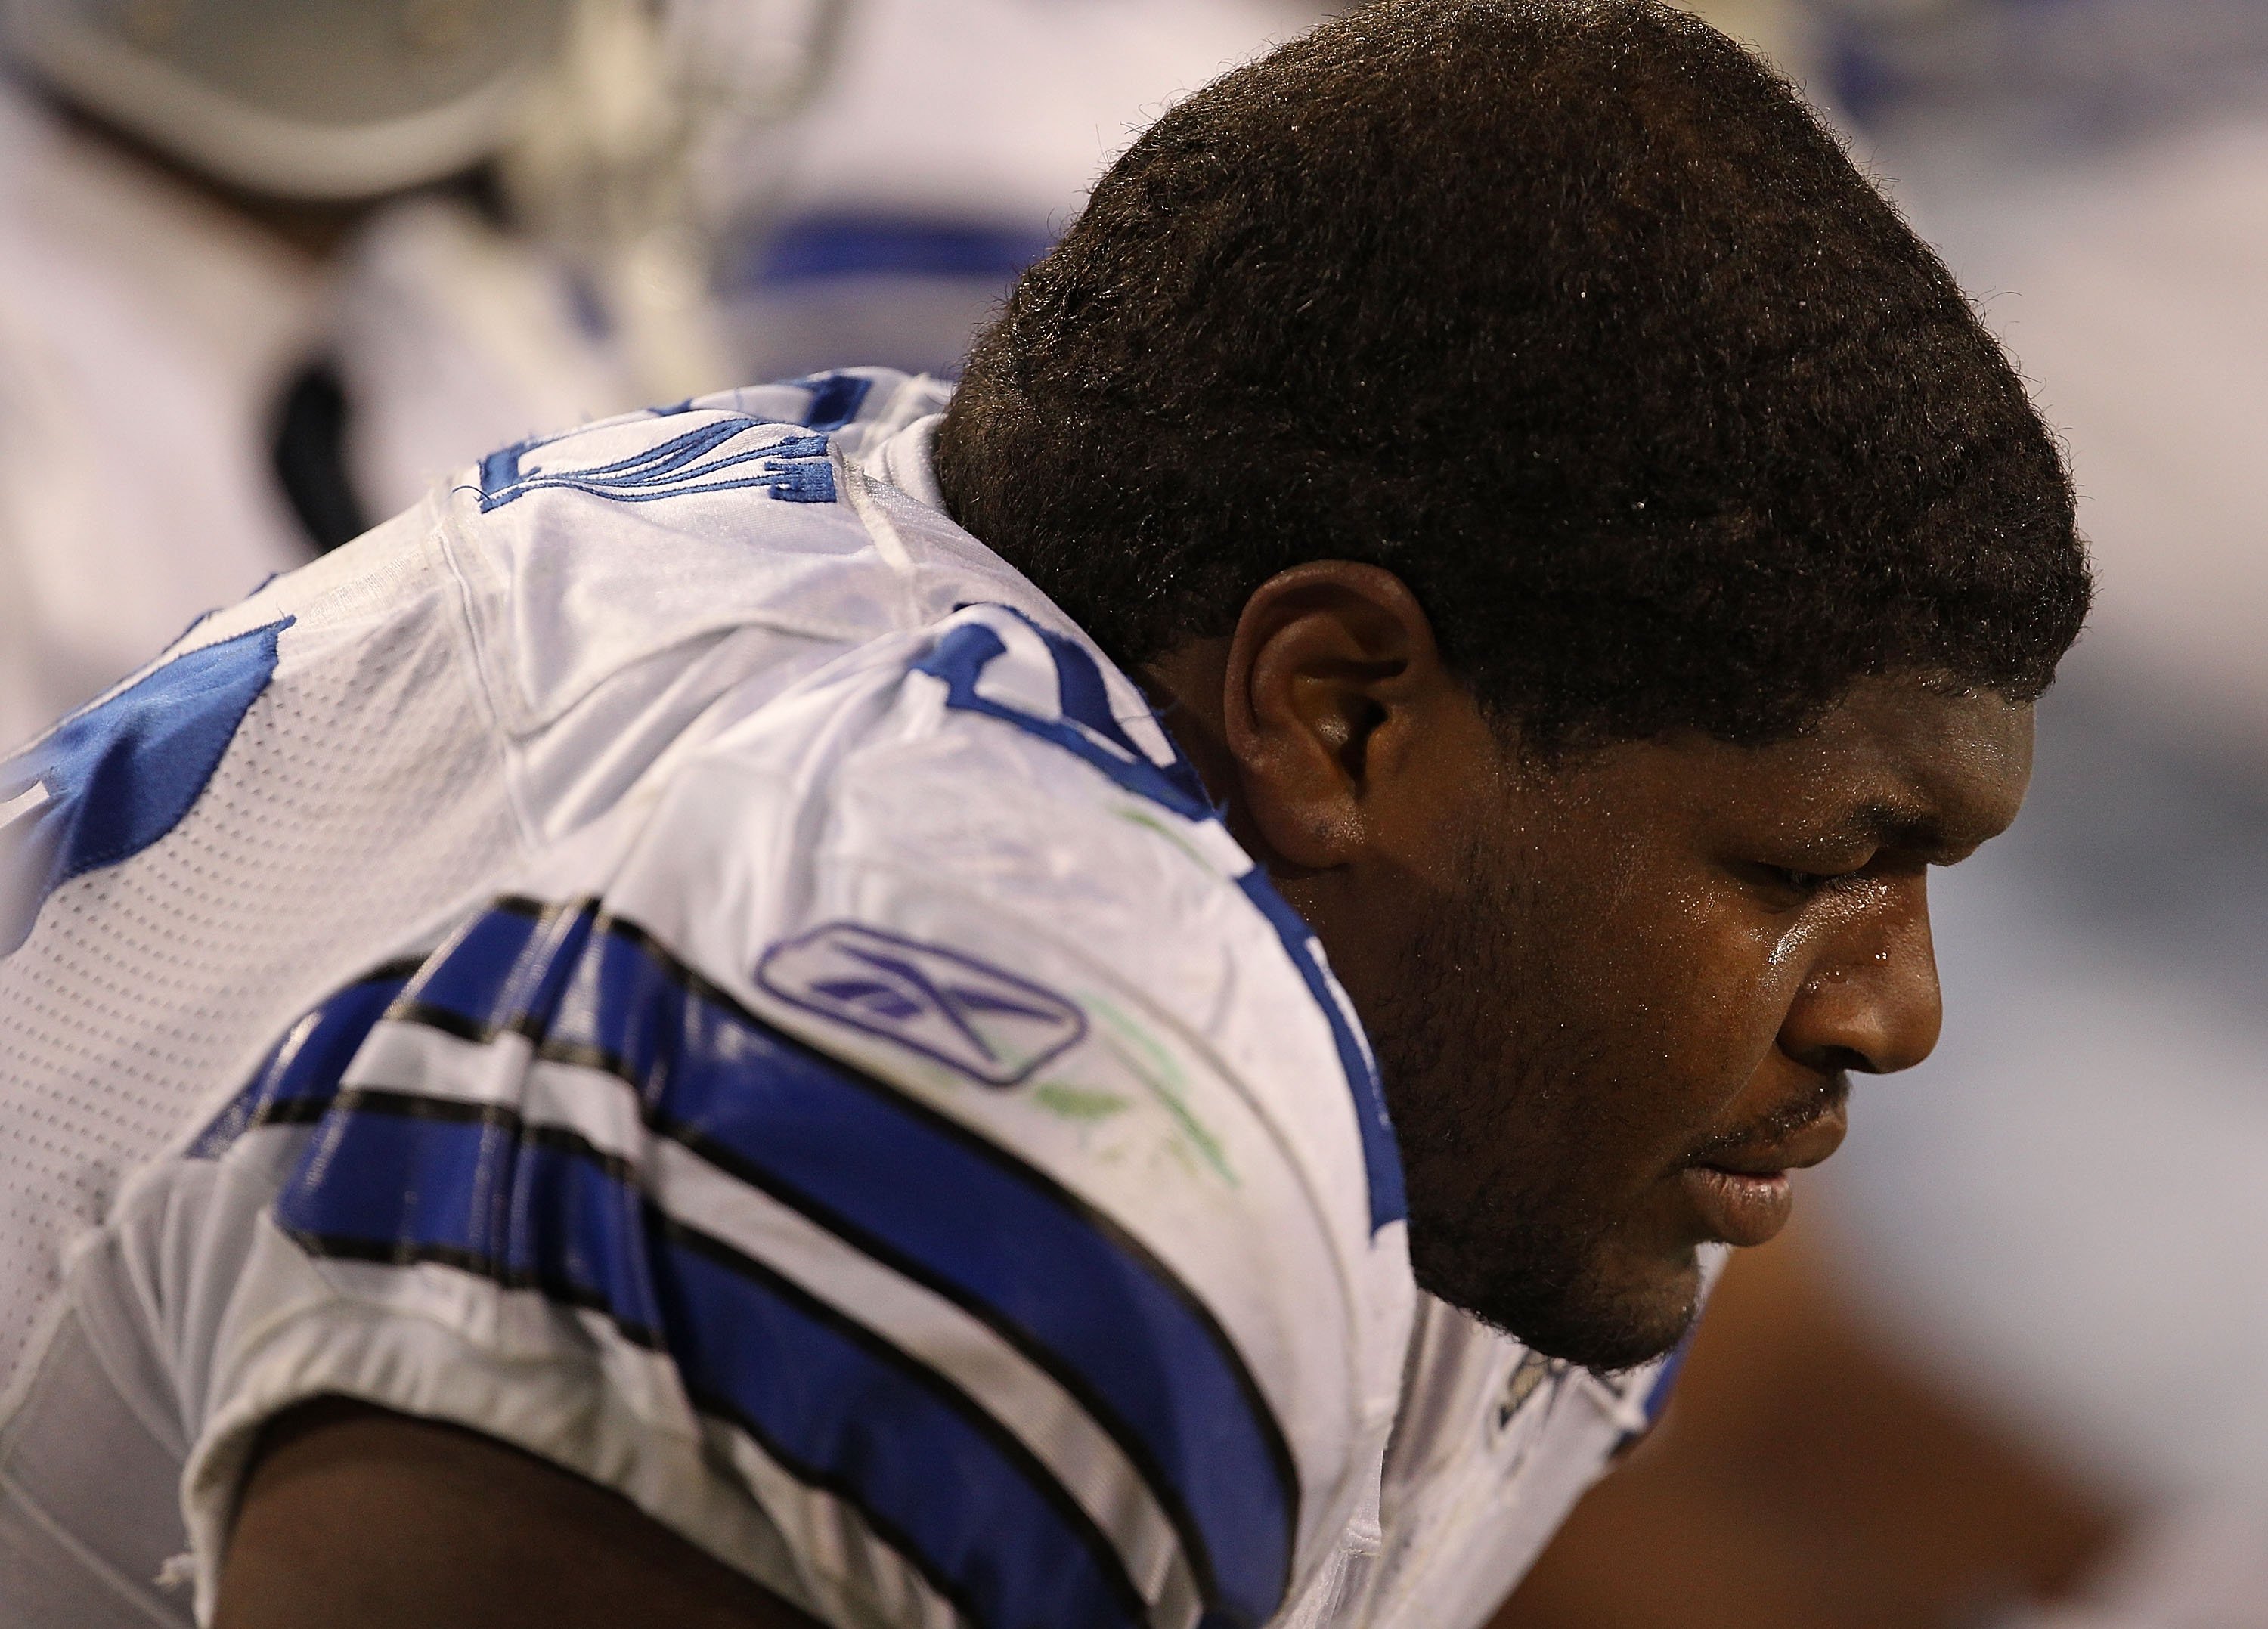 Josh Brent of the Dallas Cowboys sits on the bench during a game against the Green Bay Packers at Lambeau Field on November 7, 2010 | Photo: Getty Images